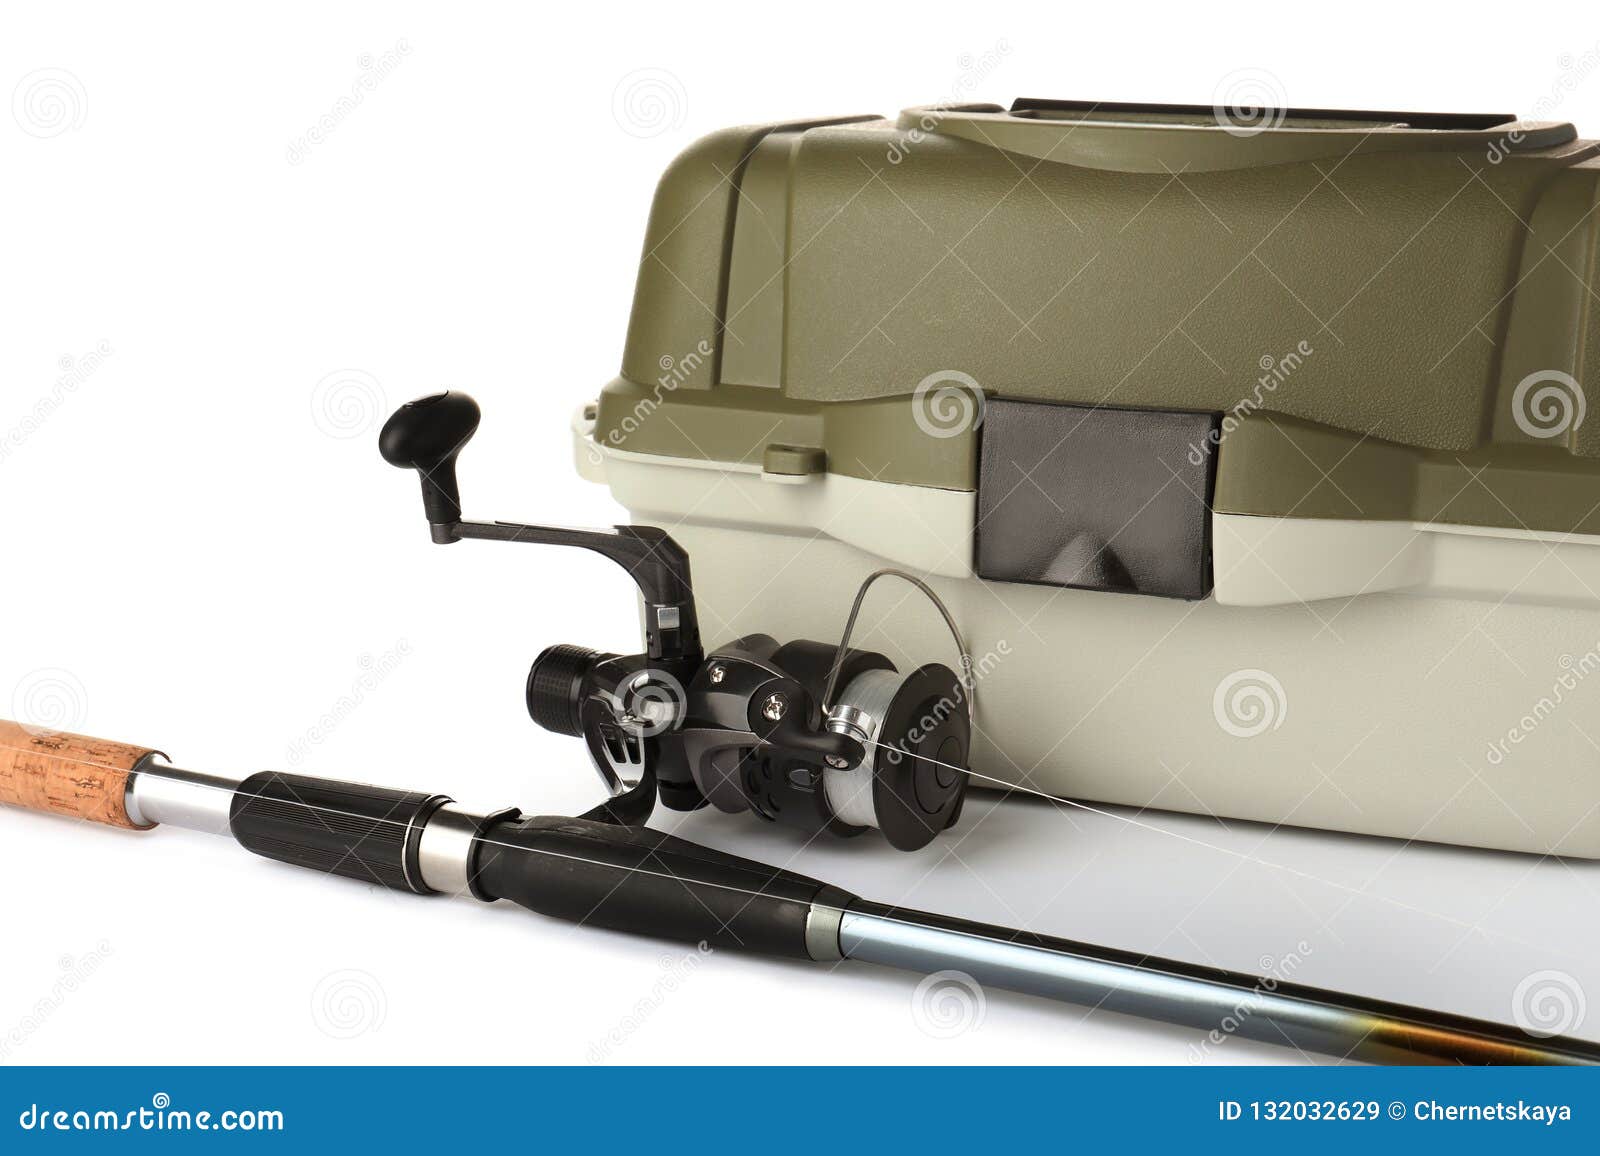 Box for Tackle and Fishing Rod Stock Image - Image of holiday